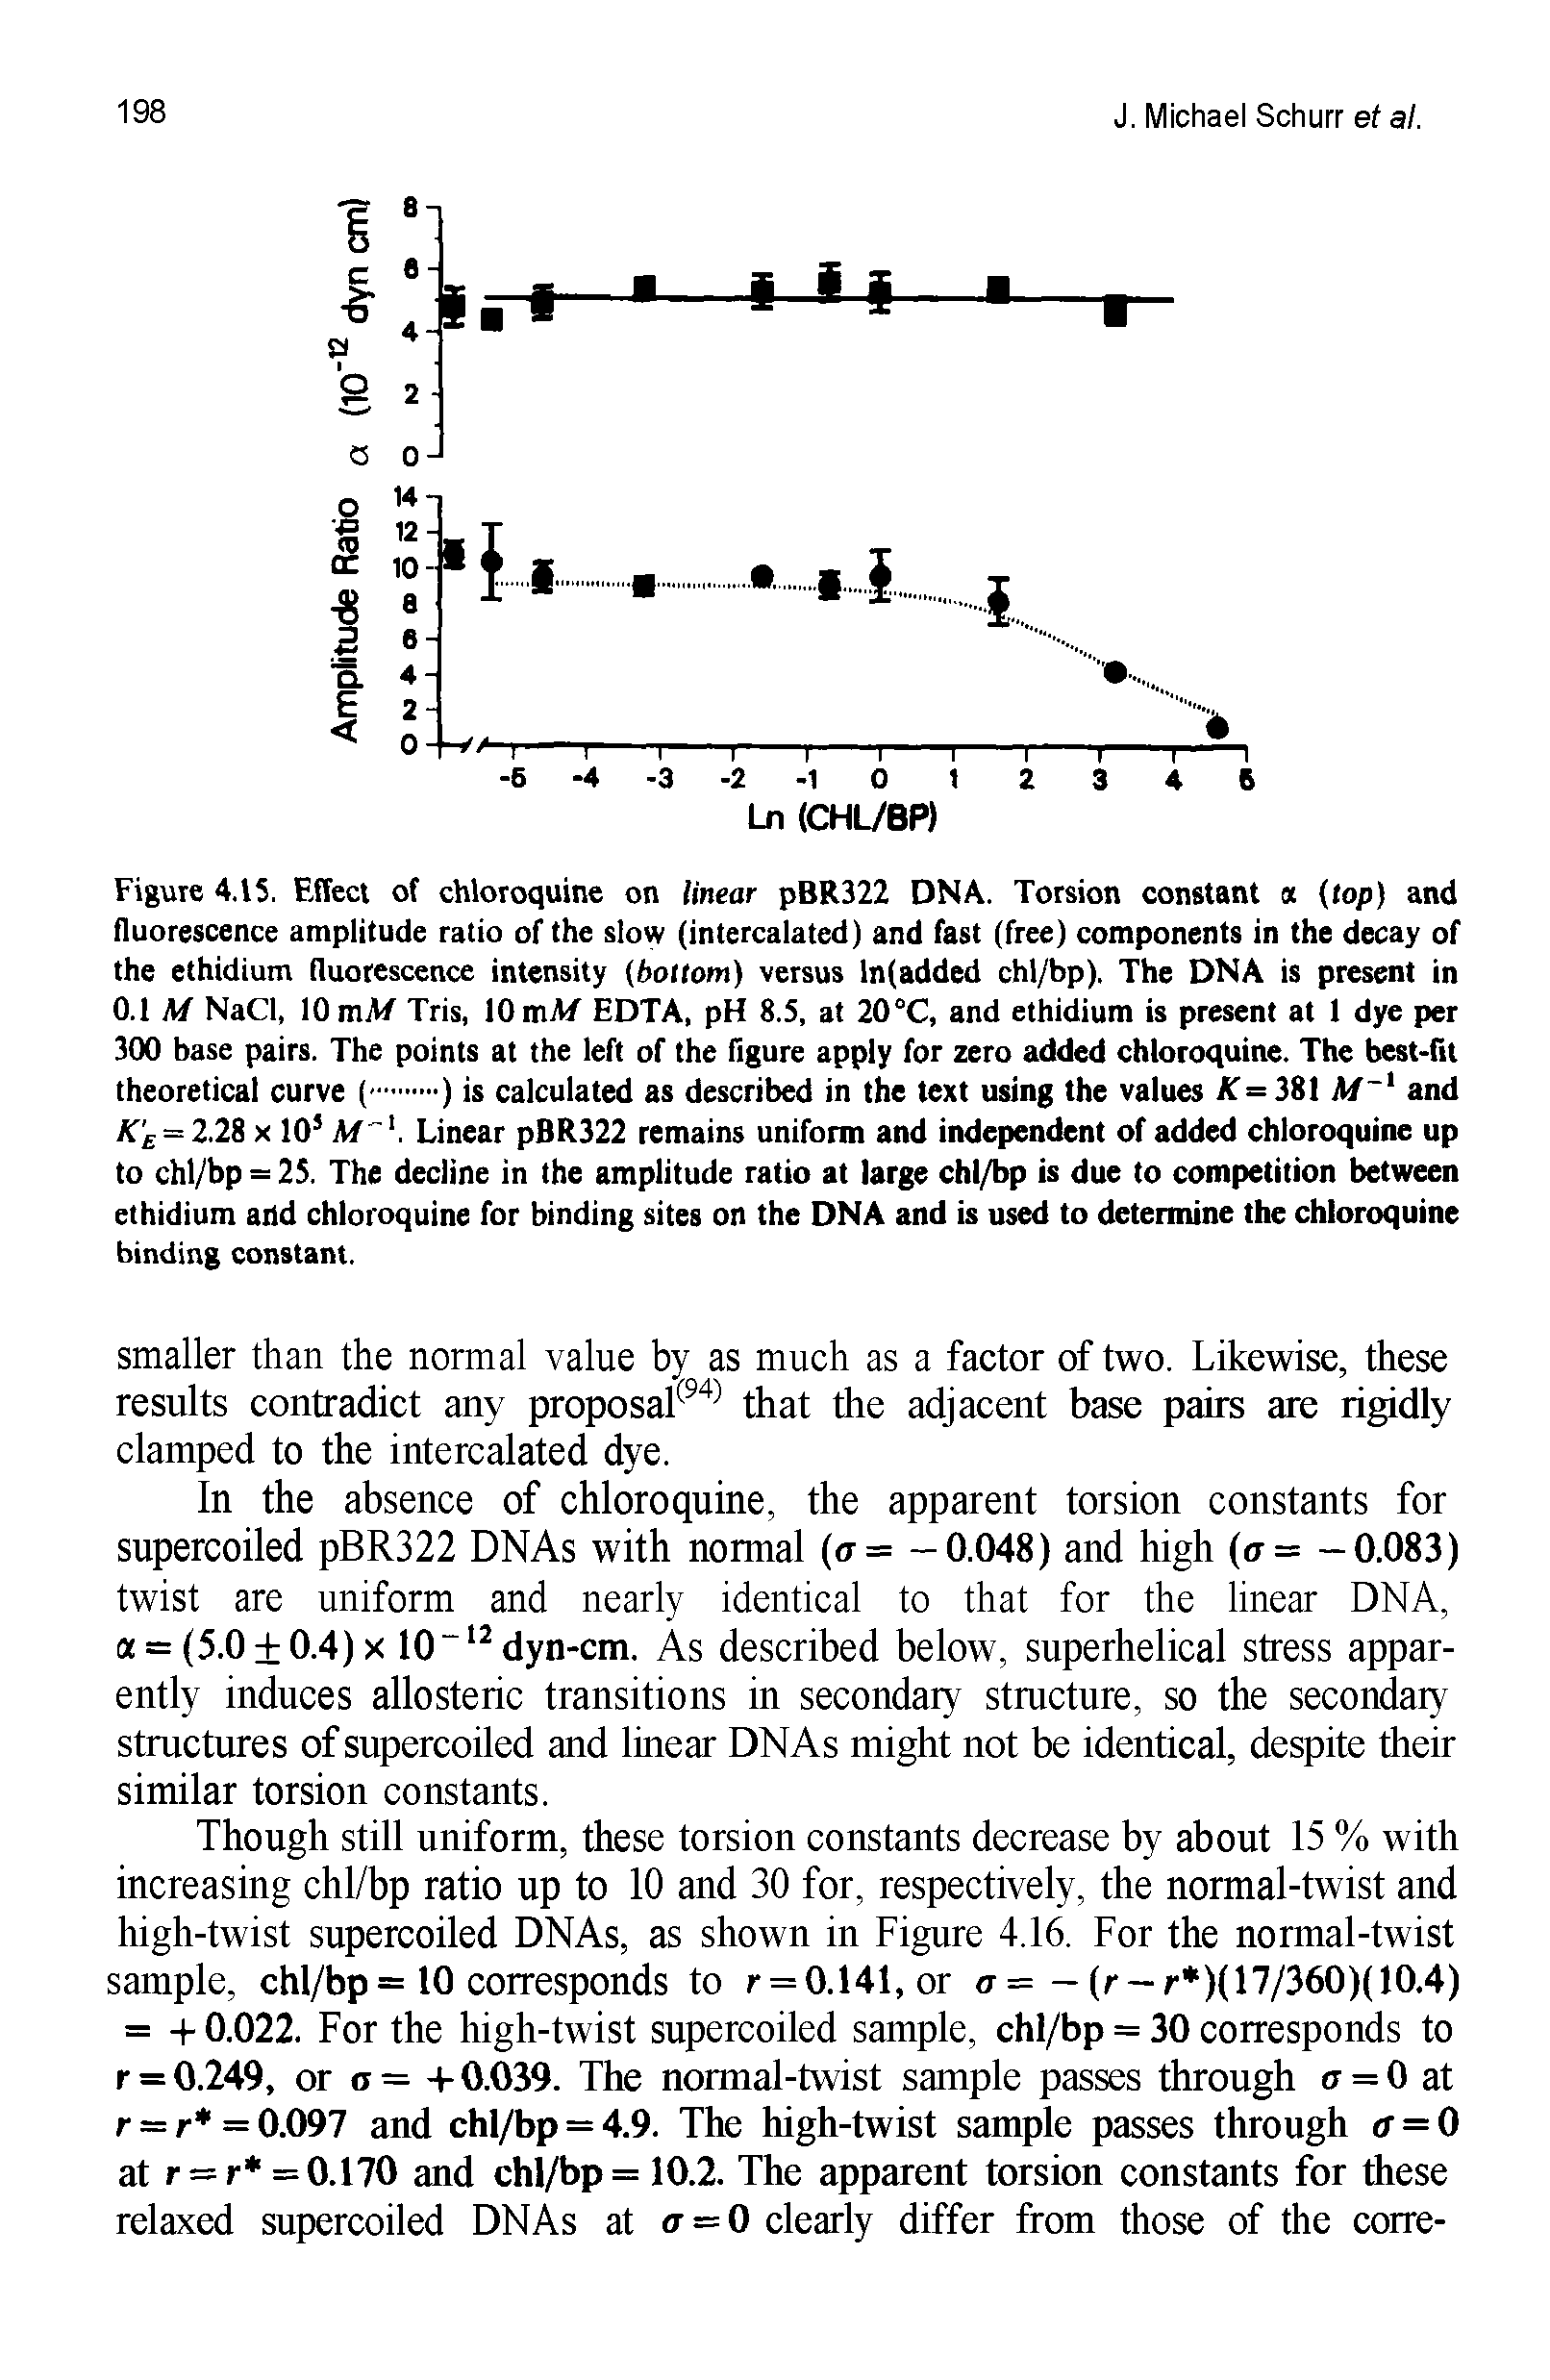 Figure 4.15. Effect of chloroquine on linear pBR322 DNA. Torsion constant (top) and fluorescence amplitude ratio of the slow (intercalated) and fast (free) components in the decay of the ethidium fluorescence intensity (hottom) versus ln(added chl/bp). The DNA is present in 0.1 M NaCl, 10 mM Tris, 10 mM EDTA, pH 8.5, at 20°C, and ethidium is present at 1 dye per 300 base pairs. The points at the left of the figure apply for zero added chloroquine. The best-fit...